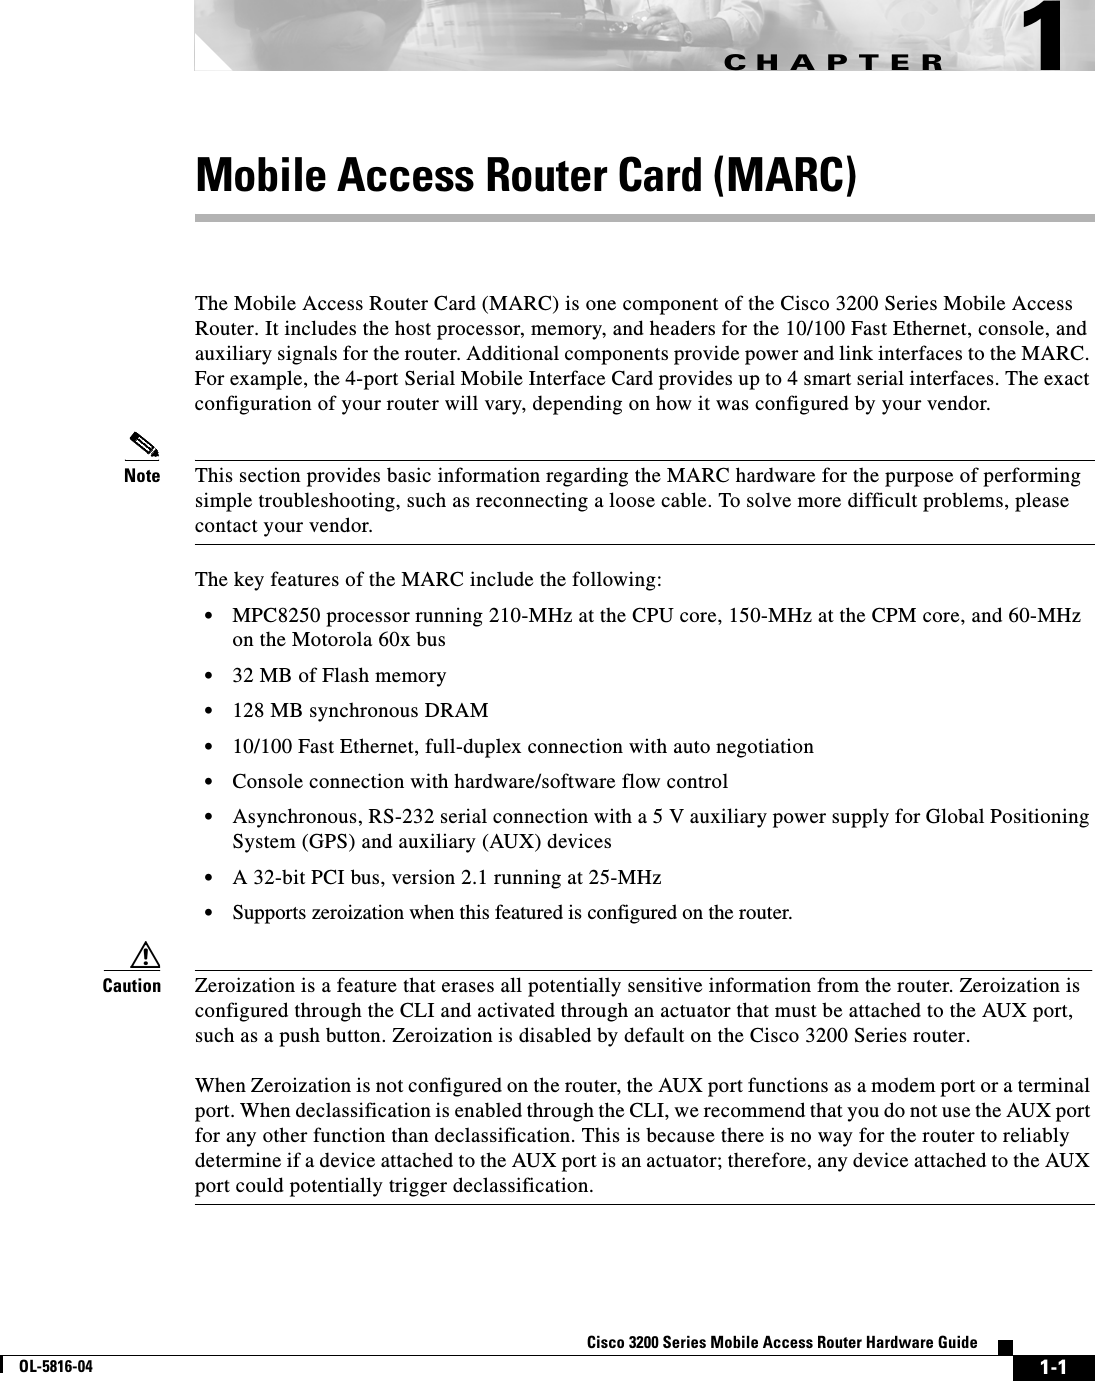 CHAPTER 1-1Cisco 3200 Series Mobile Access Router Hardware GuideOL-5816-041Mobile Access Router Card (MARC) The Mobile Access Router Card (MARC) is one component of the Cisco 3200 Series Mobile Access Router. It includes the host processor, memory, and headers for the 10/100 Fast Ethernet, console, and auxiliary signals for the router. Additional components provide power and link interfaces to the MARC. For example, the 4-port Serial Mobile Interface Card provides up to 4 smart serial interfaces. The exact configuration of your router will vary, depending on how it was configured by your vendor.Note This section provides basic information regarding the MARC hardware for the purpose of performing simple troubleshooting, such as reconnecting a loose cable. To solve more difficult problems, please contact your vendor.The key features of the MARC include the following:•MPC8250 processor running 210-MHz at the CPU core, 150-MHz at the CPM core, and 60-MHz on the Motorola 60x bus•32 MB of Flash memory•128 MB synchronous DRAM•10/100 Fast Ethernet, full-duplex connection with auto negotiation•Console connection with hardware/software flow control•Asynchronous, RS-232 serial connection with a 5 V auxiliary power supply for Global Positioning System (GPS) and auxiliary (AUX) devices•A 32-bit PCI bus, version 2.1 running at 25-MHz•Supports zeroization when this featured is configured on the router.Caution Zeroization is a feature that erases all potentially sensitive information from the router. Zeroization is configured through the CLI and activated through an actuator that must be attached to the AUX port, such as a push button. Zeroization is disabled by default on the Cisco 3200 Series router. When Zeroization is not configured on the router, the AUX port functions as a modem port or a terminal port. When declassification is enabled through the CLI, we recommend that you do not use the AUX port for any other function than declassification. This is because there is no way for the router to reliably determine if a device attached to the AUX port is an actuator; therefore, any device attached to the AUX port could potentially trigger declassification.